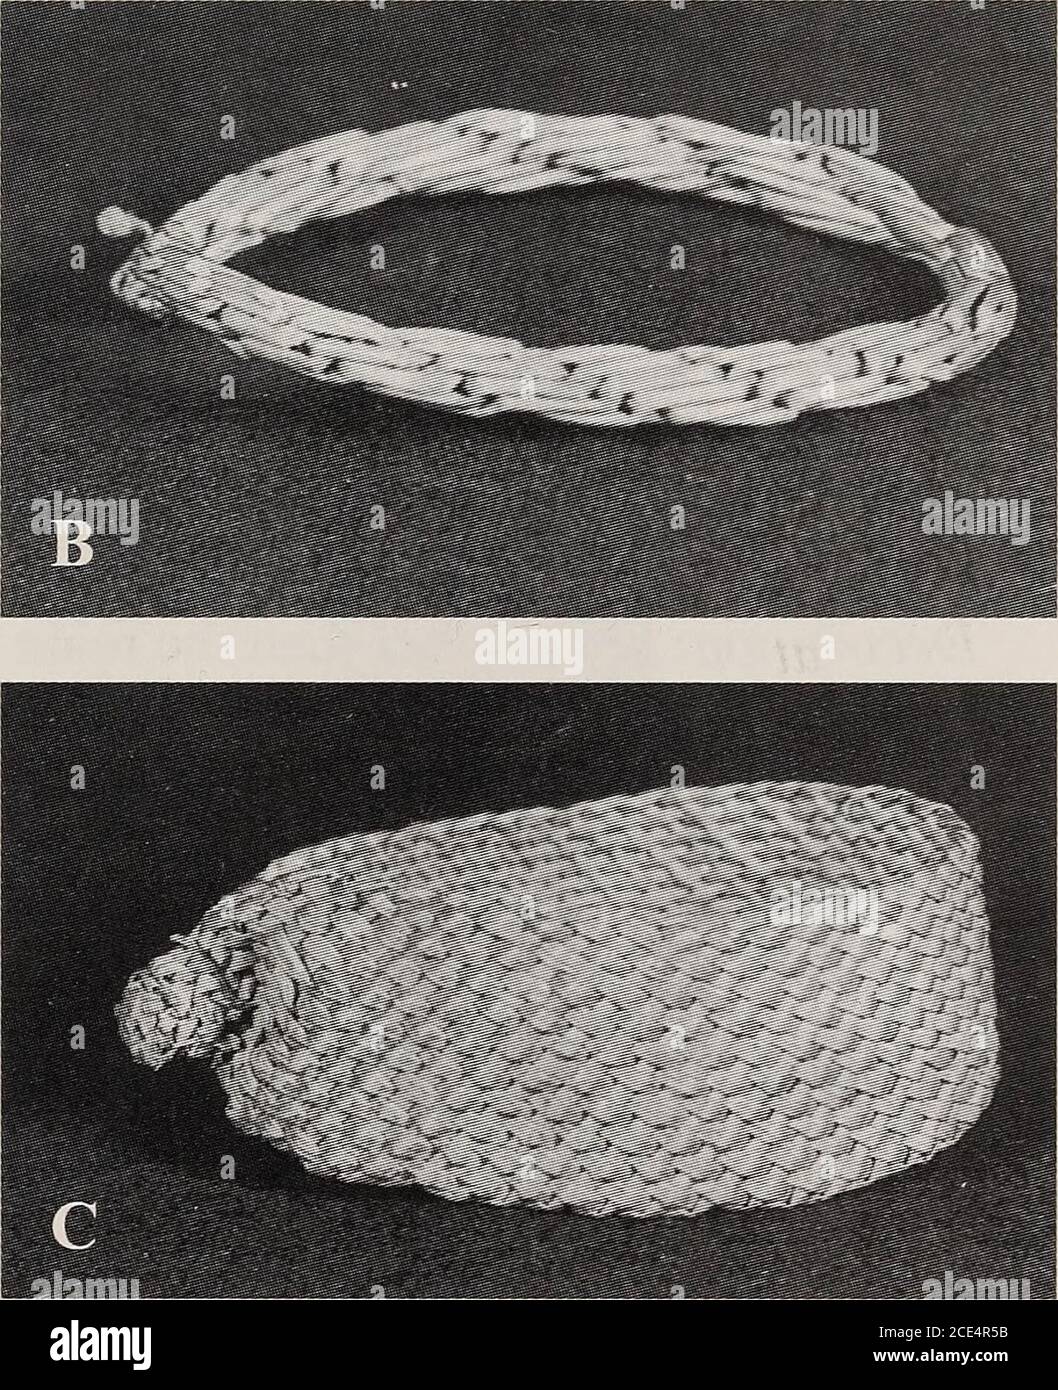 . Annals of the South African Museum = Annale van die Suid-Afrikaanse Museum . Figure 46 Plaited ornaments. A. Eastern Cape. Width of band 20 mm.SAM-5922. B. Mpondo, Flagstaff, 1901. Width of band25 mm. SAM-249b. C. Mpondo, Flagstaff, 1901. Diameter of band6 mm. SAM-249a.. Decoration: some have beads added.Ornamentation: brass buttons. ToolsNone. Materials Flowering stalks of grasses, mainly Digitaria spp., or very thin or stripped sedge. Records Early: Backhouse 1839 [1844: 269], Mpondo. Dohne 1836-1844 [1844: 42], Xhosa. 58 ANNALS OF THE SOUTH AFRICAN MUSEUM Recent: SAM-249, 1901, Mpondo, Fl Stock Photo